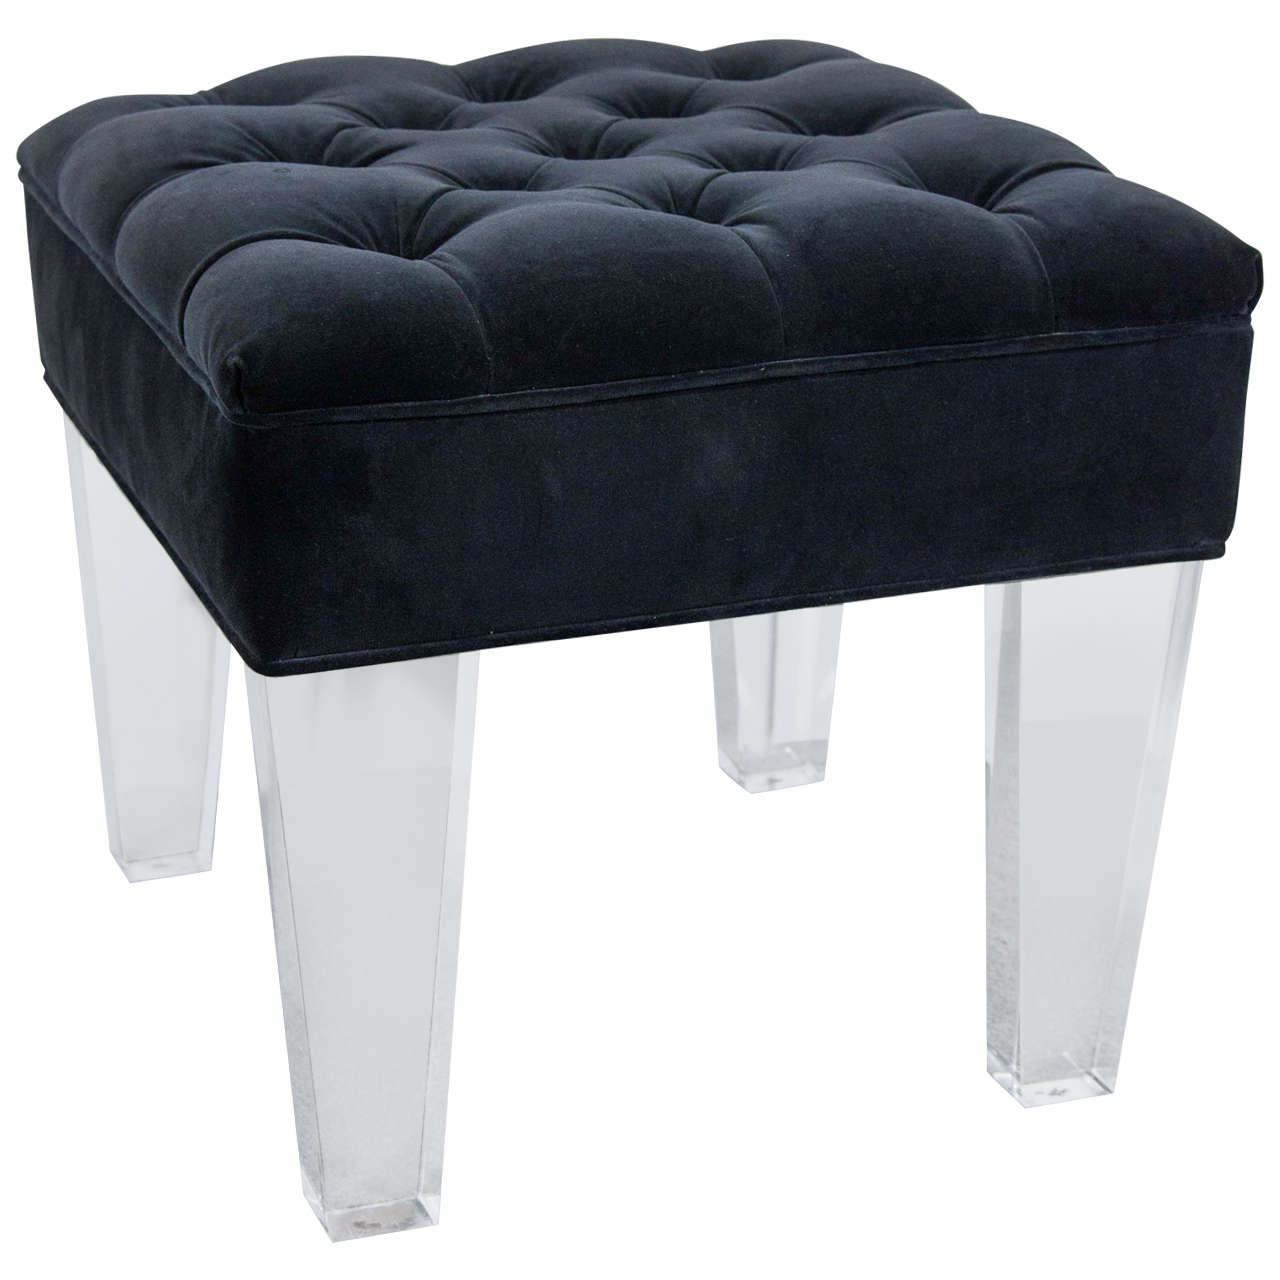 A vintage pair of button tufted black velvet stools with Lucite legs by designer Michael DeLoach.

Good vintage condition with age appropriate wear. One stool has some black marks on the bottom of the feet and a single mark on the front of one of